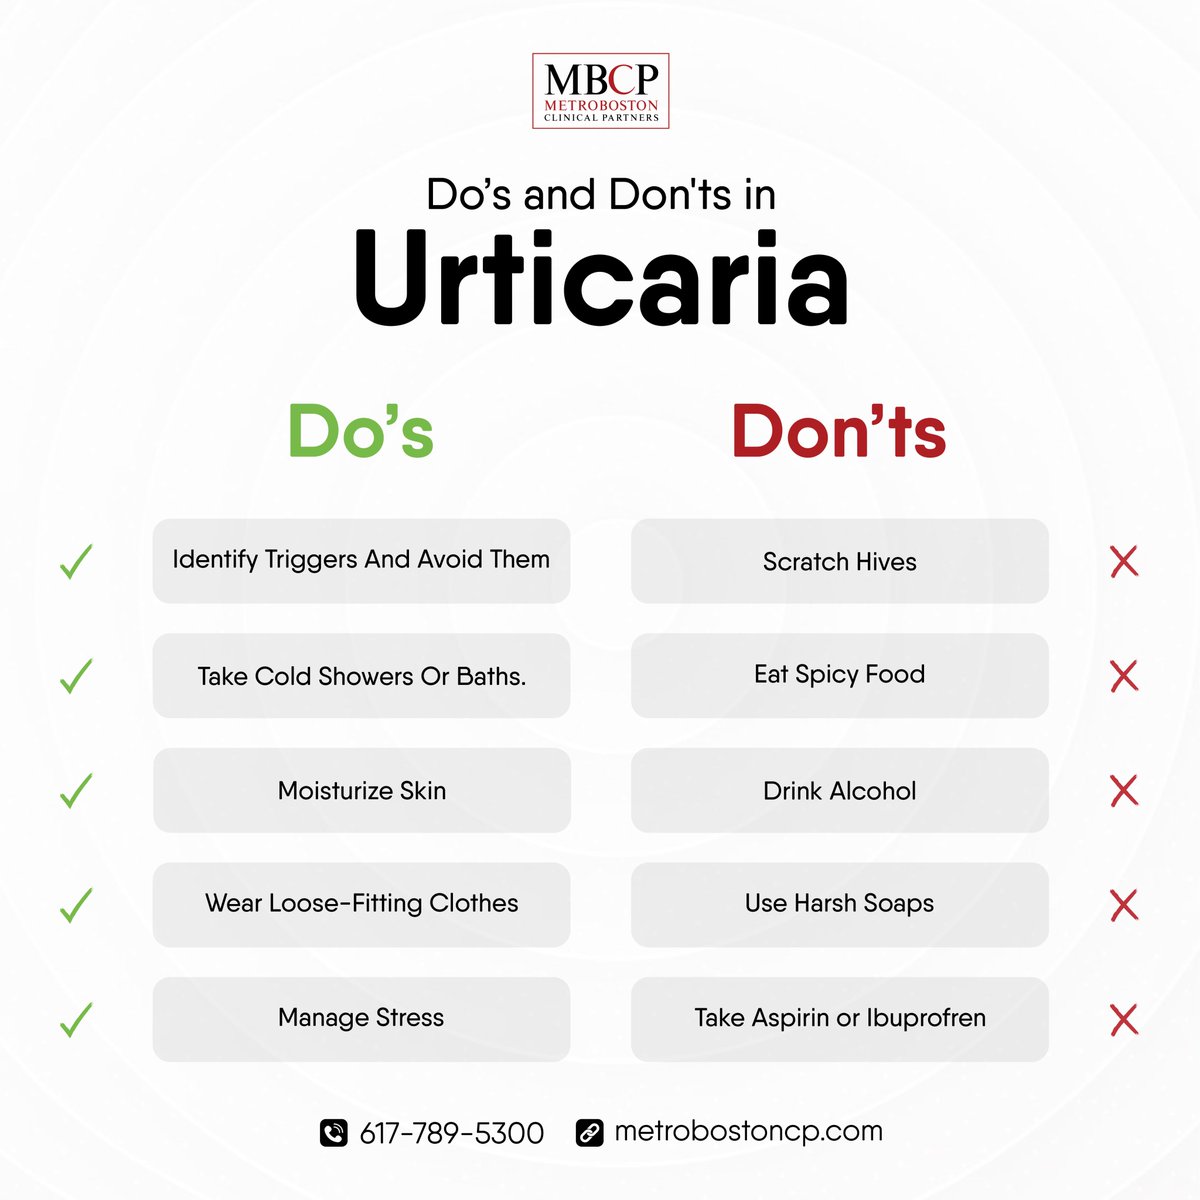 Chronic spontaneous urticaria become painful upon itching. However, you can manage your Hives with the help of lifestyle and tips some of which we have included in this post.

#spontaneousurticaria #healthyskin #chronicillness #womenshealth #chronicpain #MBCP #clinicalpartner